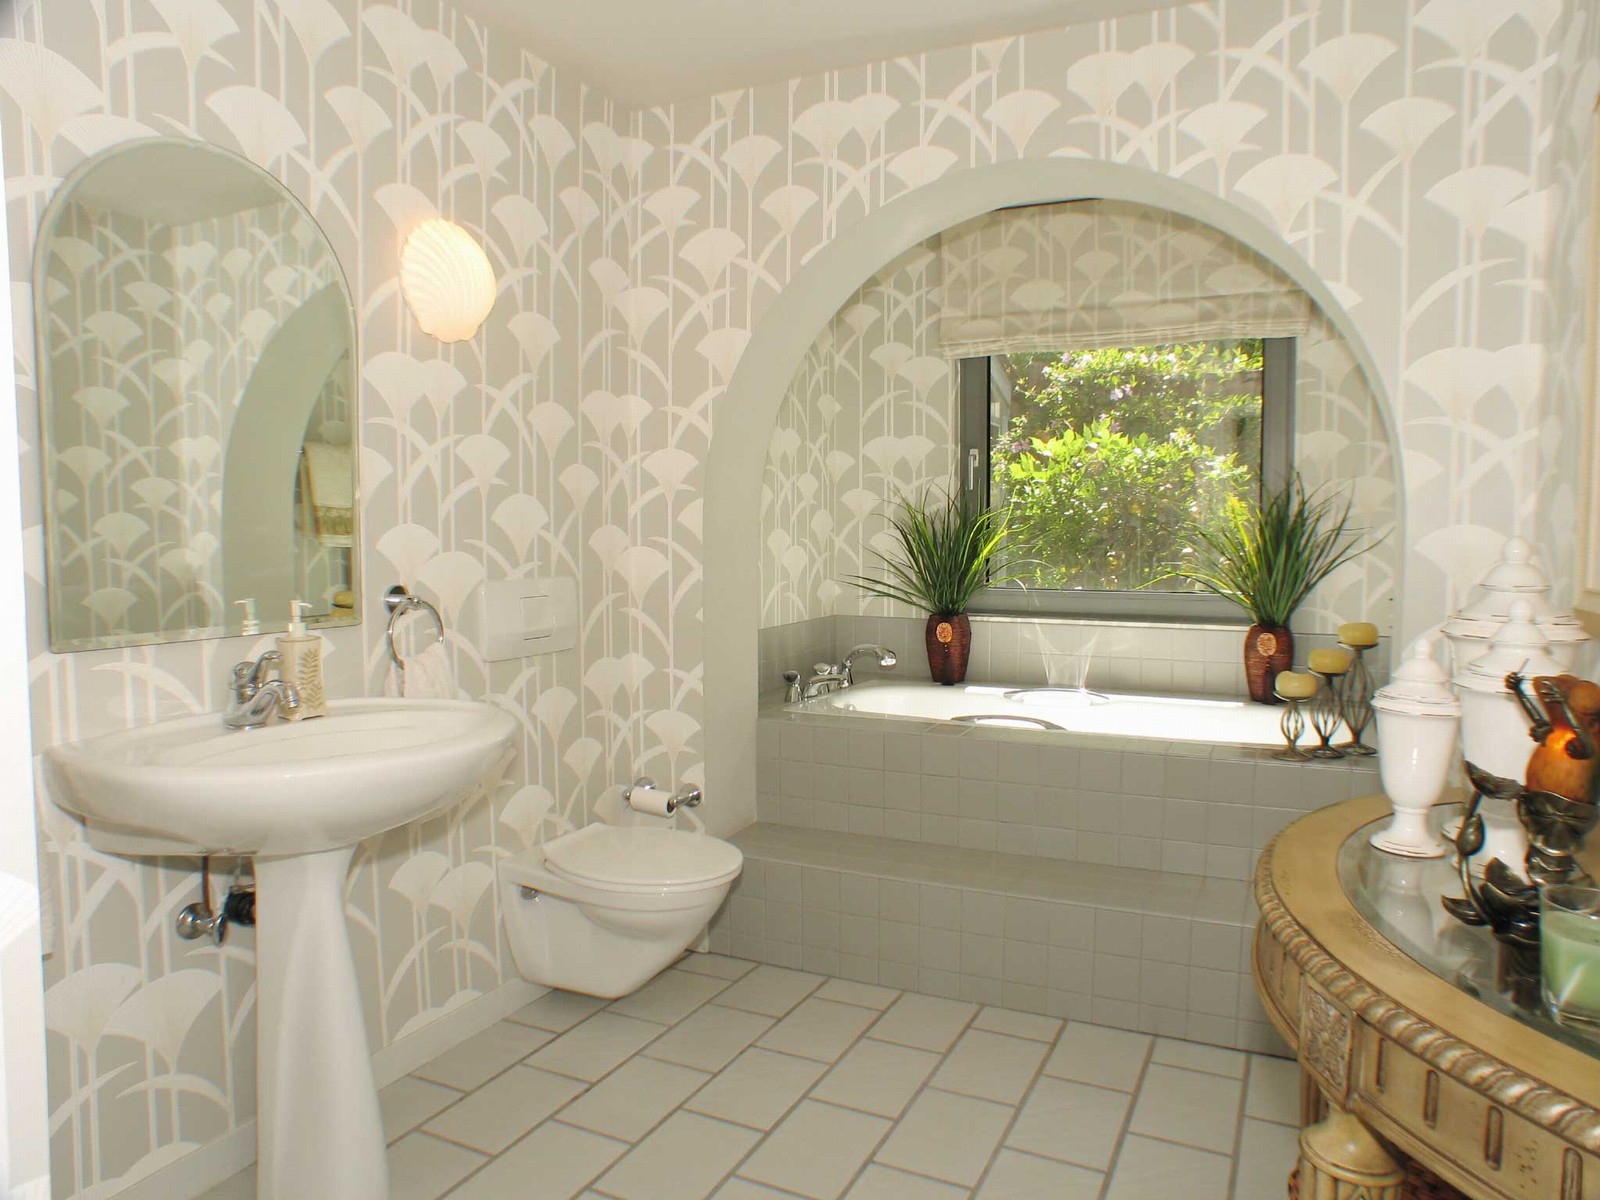 ... what do you think of this bathroom? Look at the wild wallpaper...grey